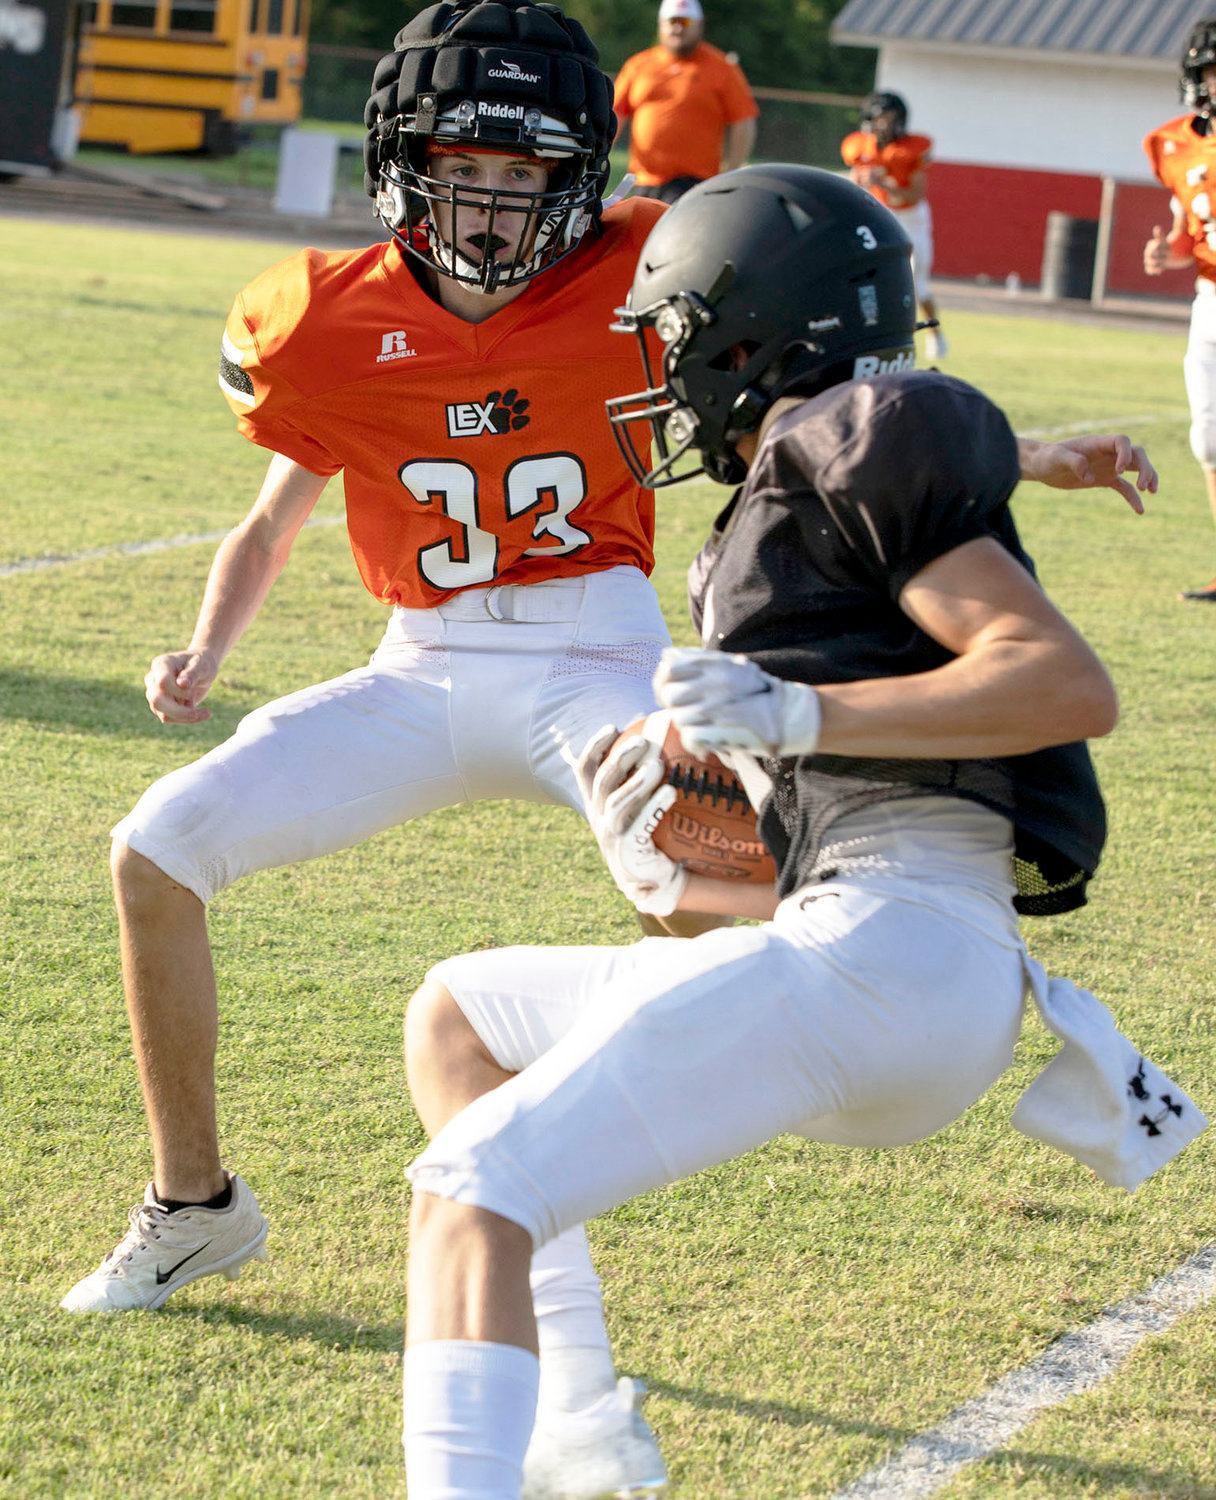 Lexington scrimmaged Lone Grove Friday in a tune-up before the 2021 football season begins. Lexington opens their season September 2 on the road against Little Axe.